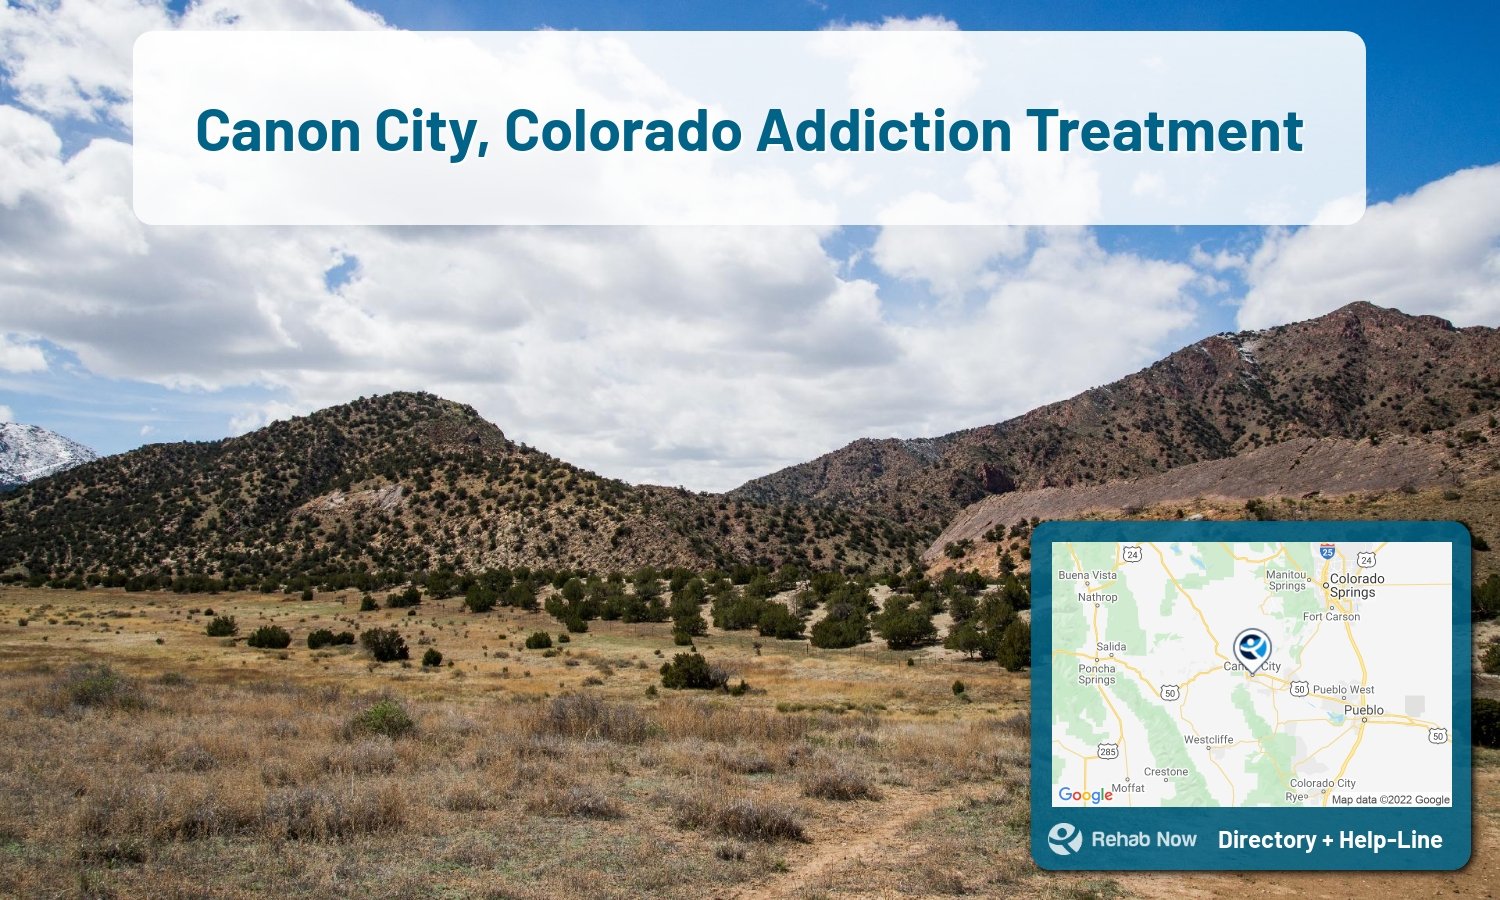 Let our expert counselors help find the best addiction treatment in Canon City, Colorado now with a free call to our hotline.